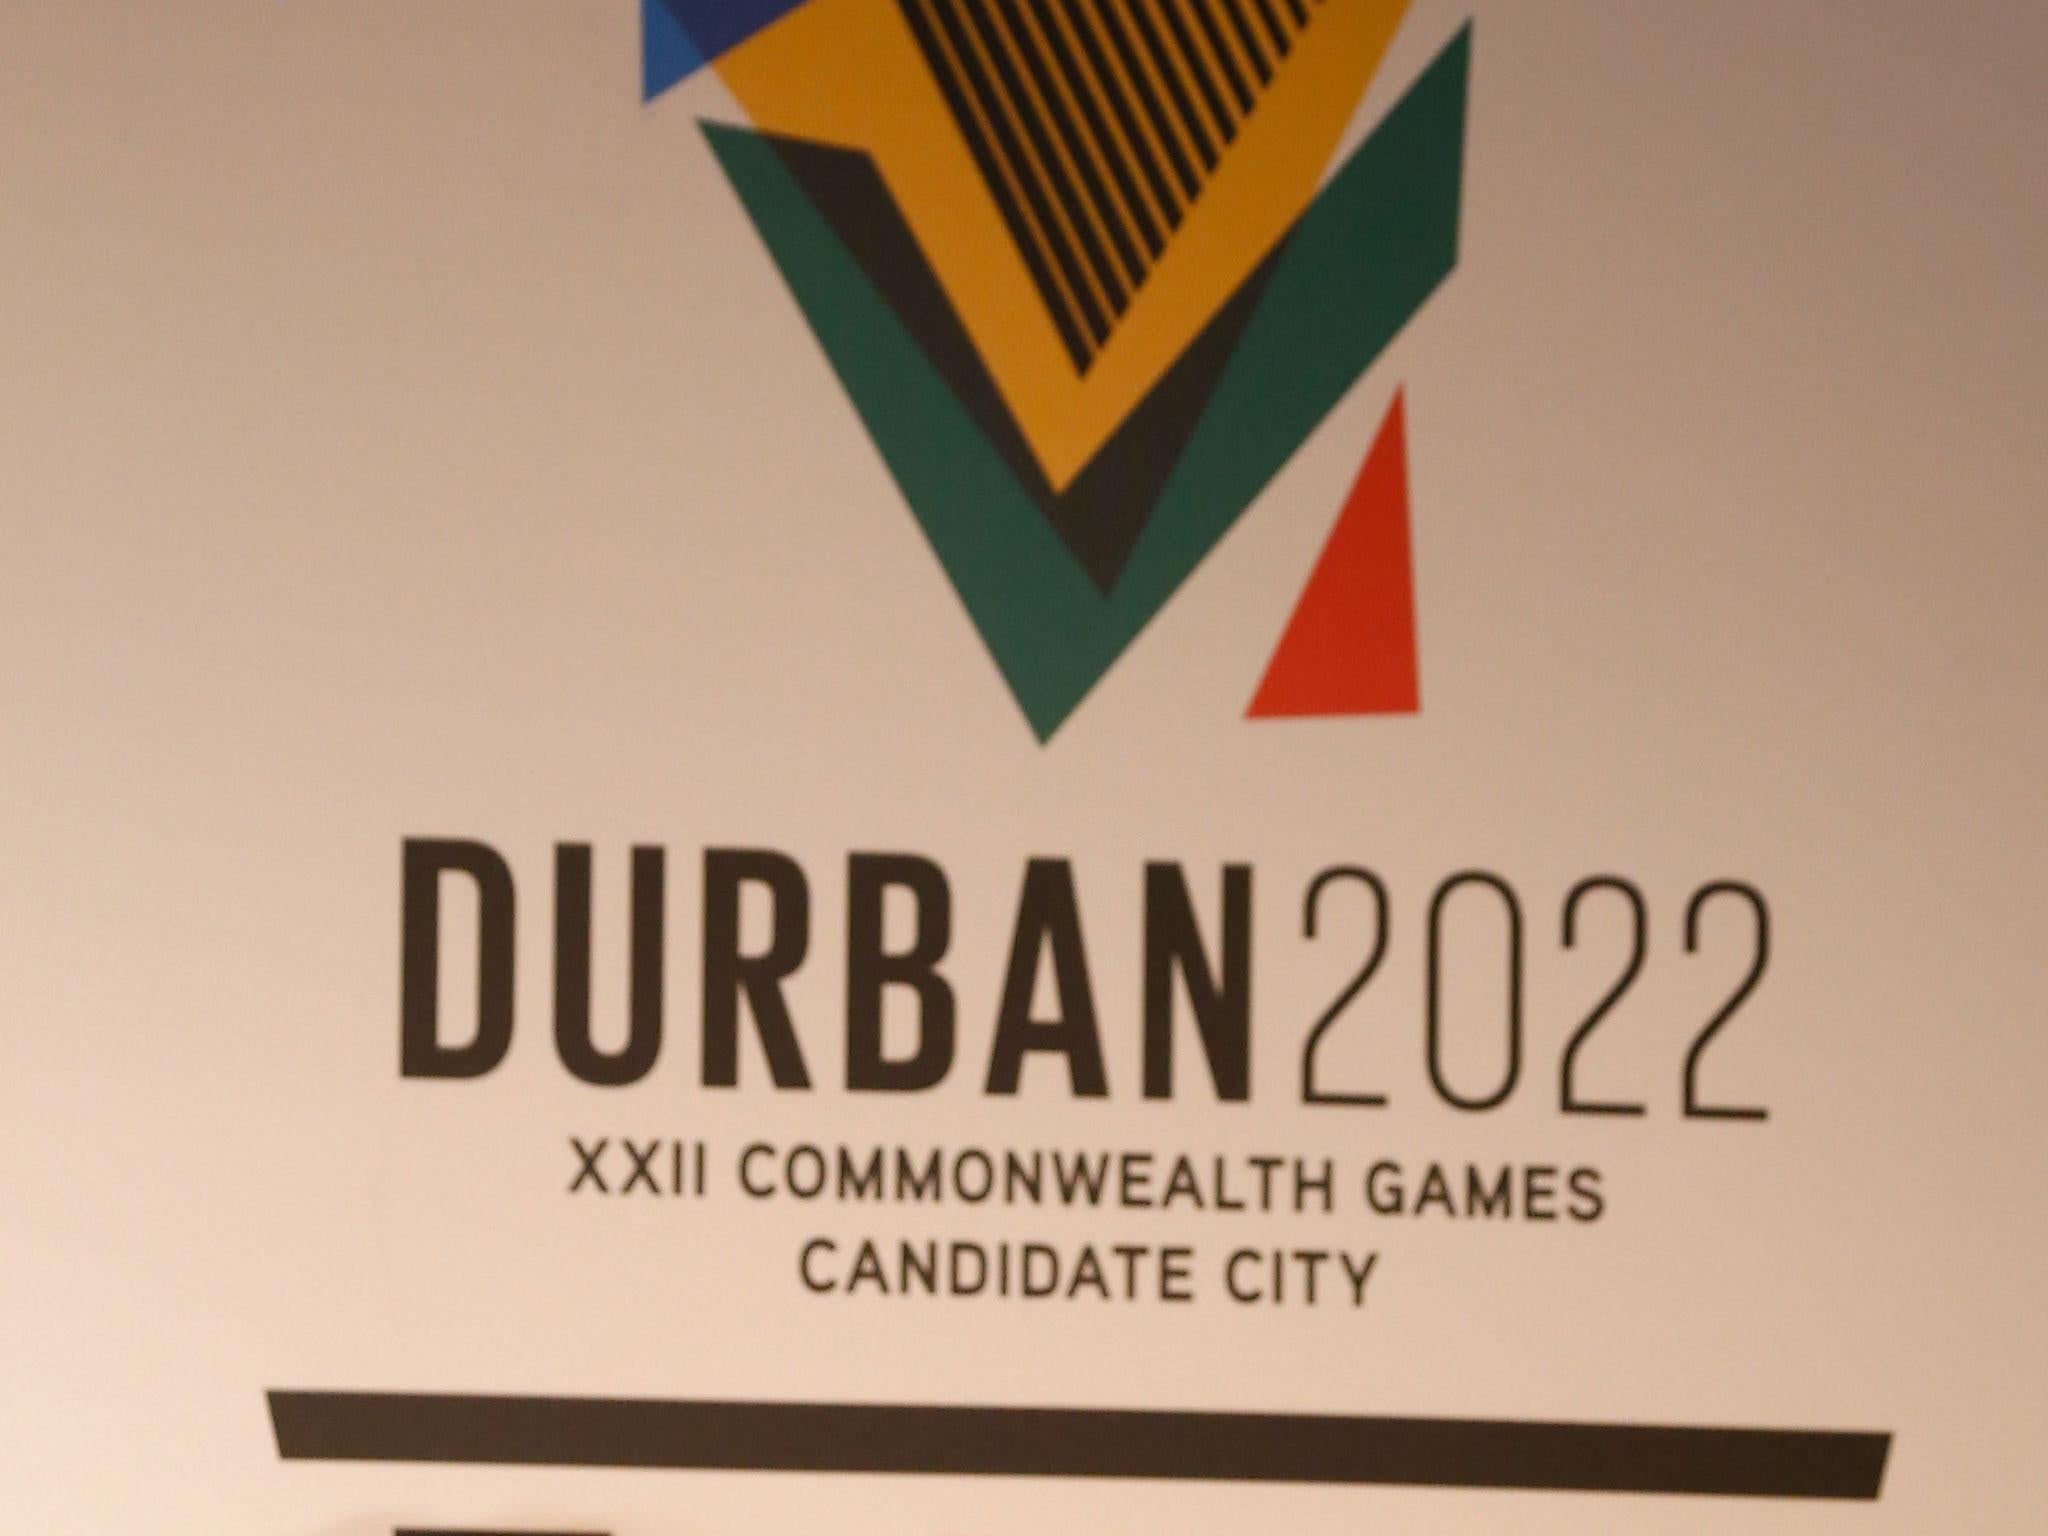 Durban is to host the 2022 Commonwealth Games